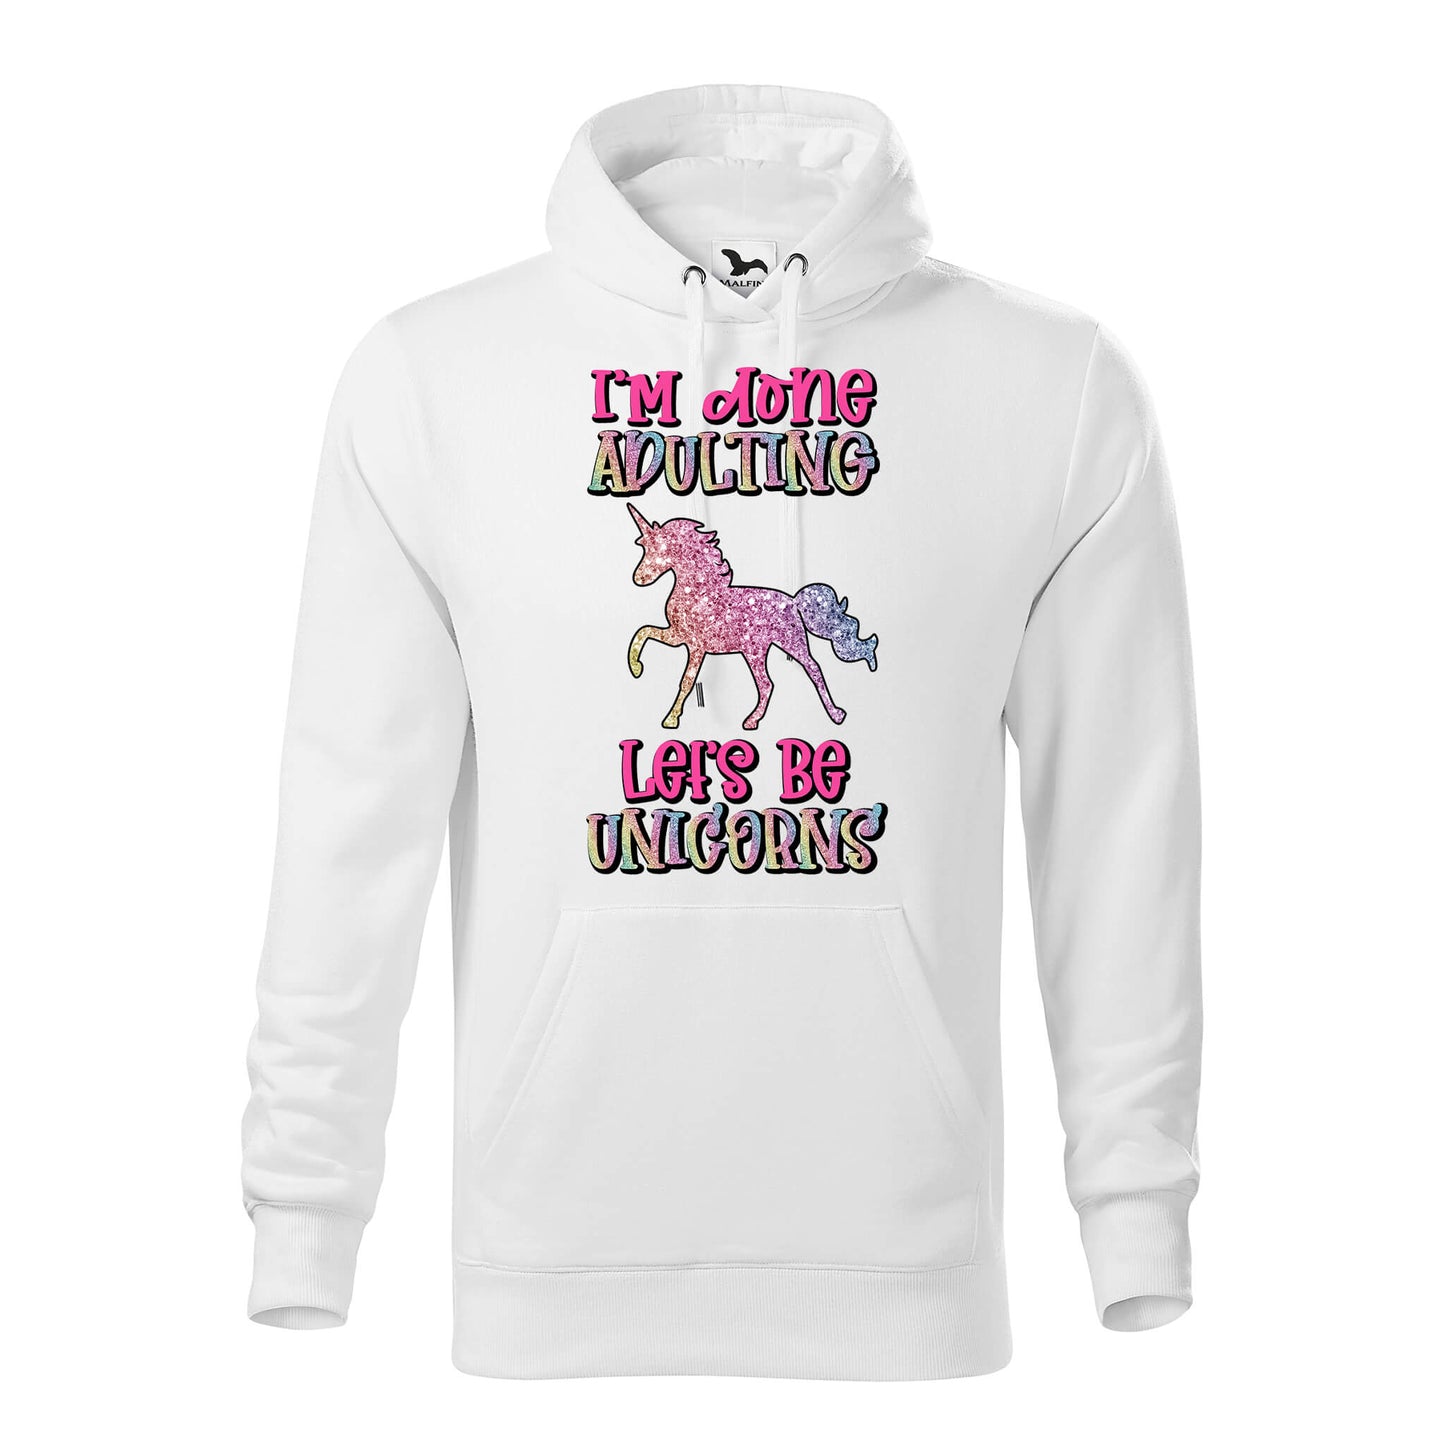 Im done adulting lets be unicorns hoodie - rvdesignprint